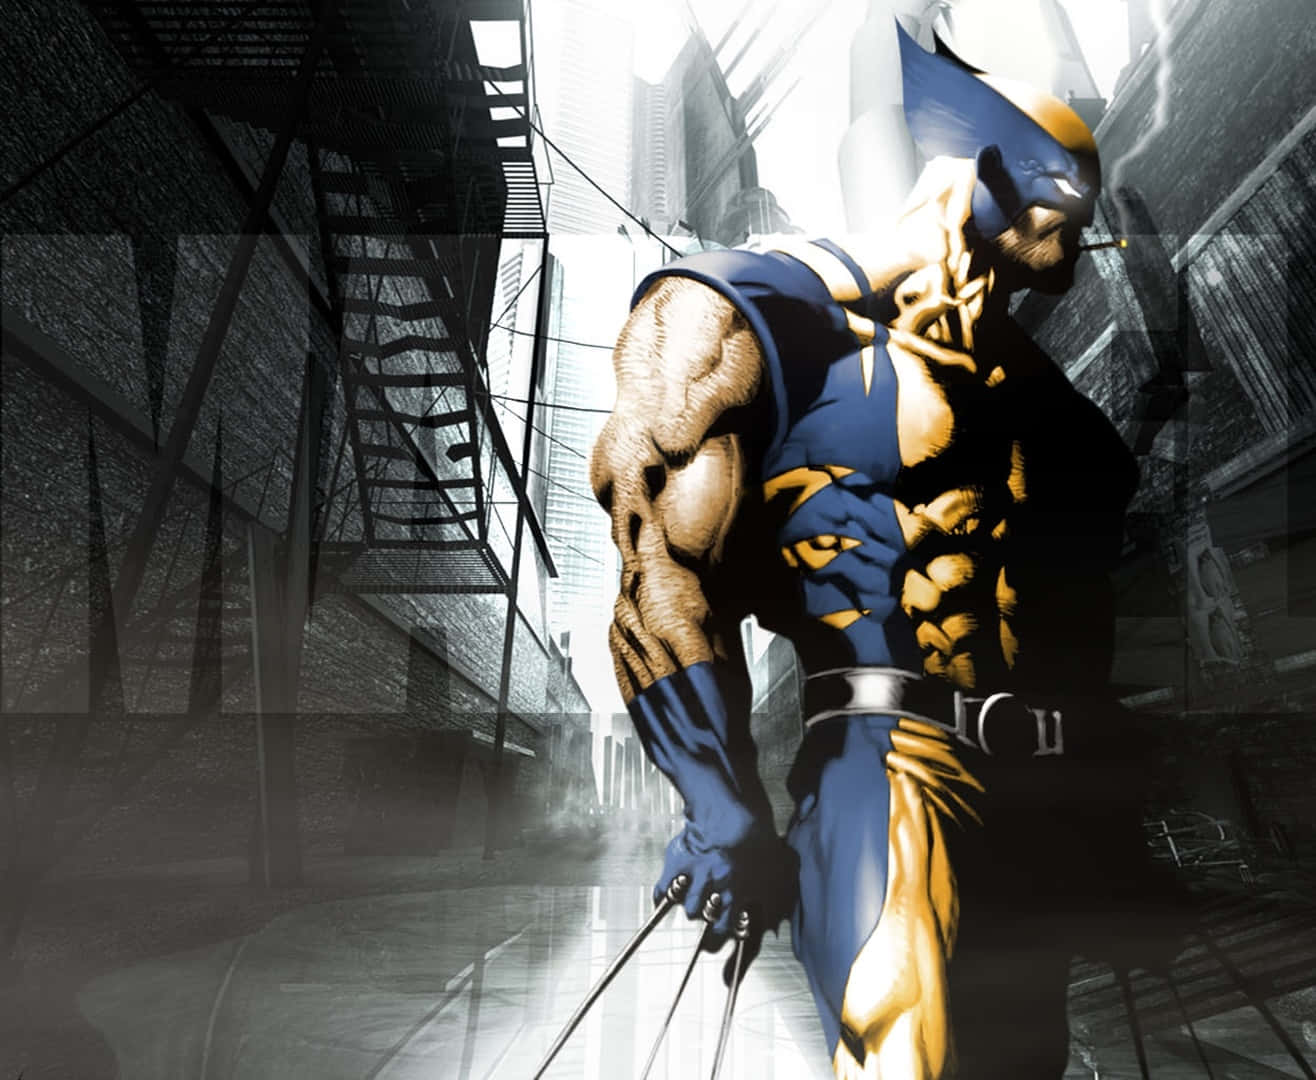 Get ready to enter the twisted world of Wolverine! Wallpaper